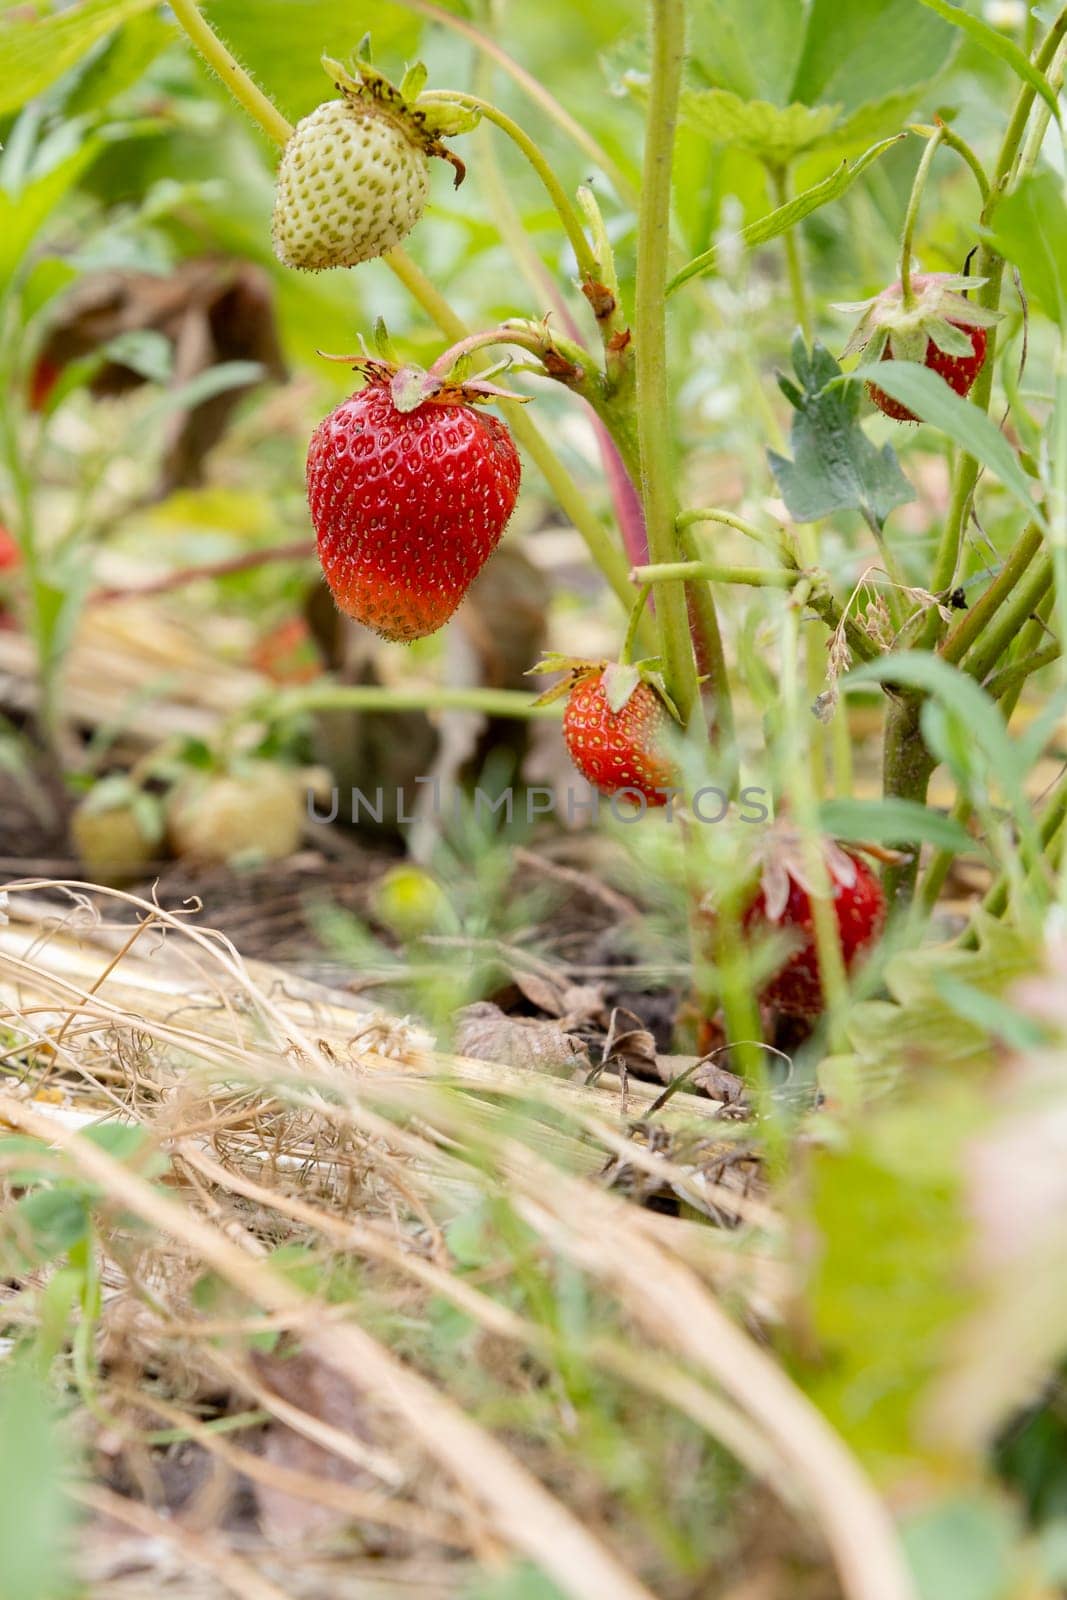 Red ripe and unripe strawberries on the bush. by mvg6894